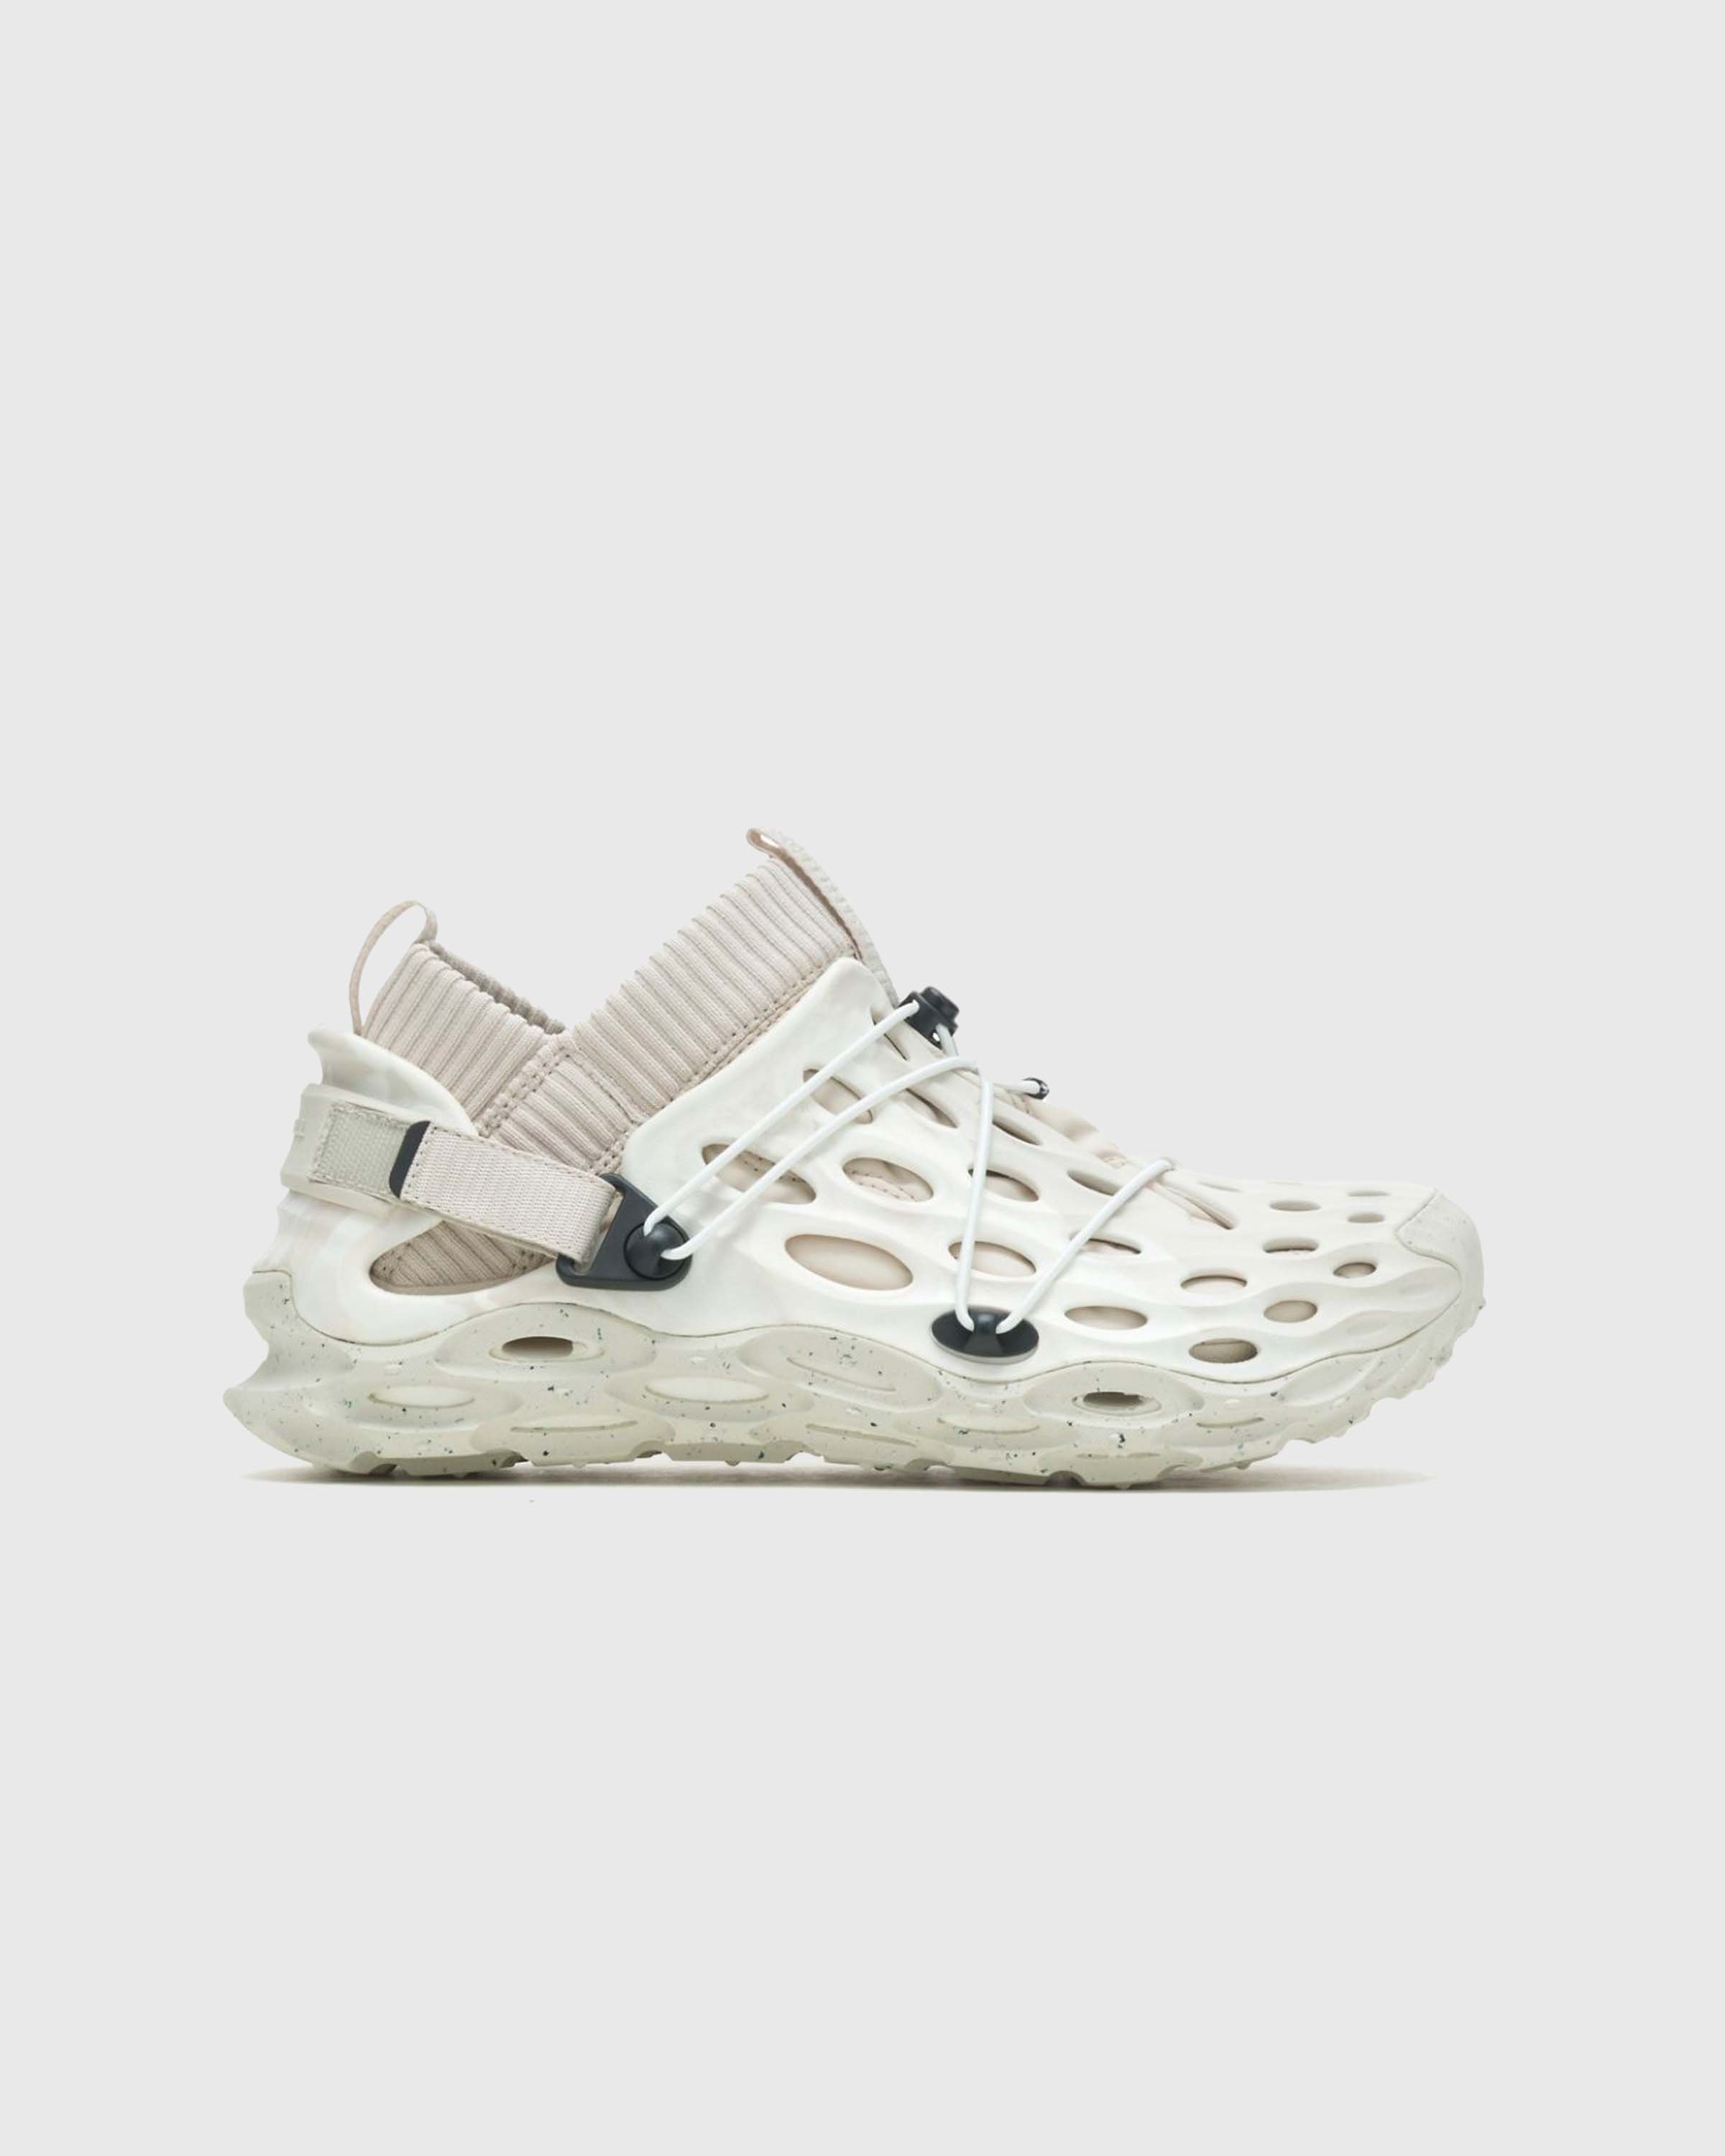 Merrell - Hydro Moc AT Ripstop 1TRL White - Footwear - White - Image 1